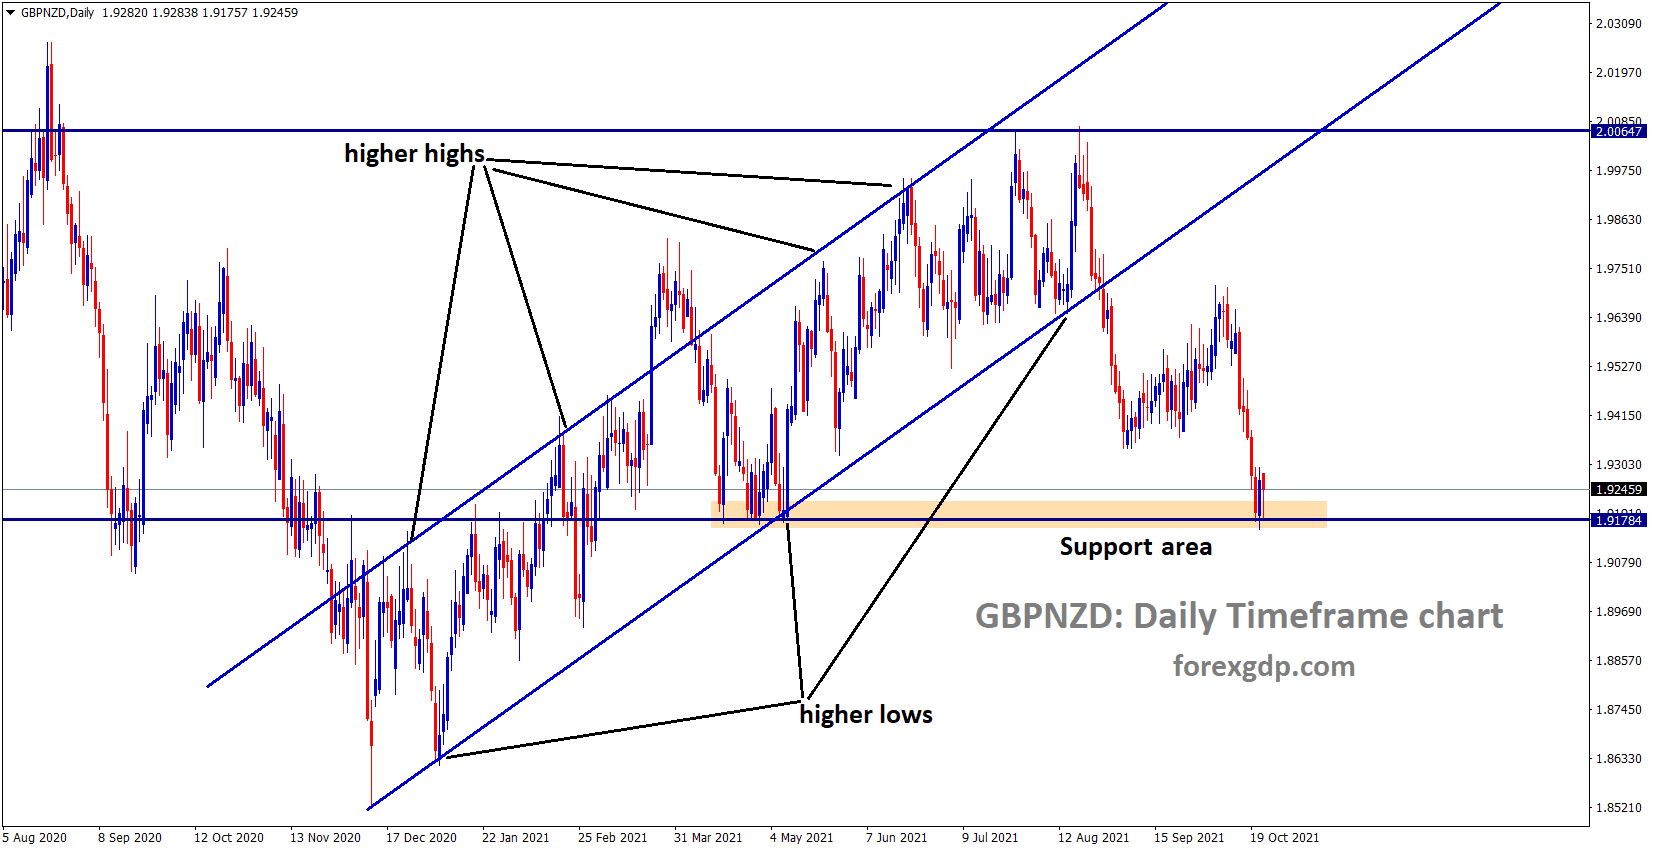 GPBNZD is consolidating at the support area